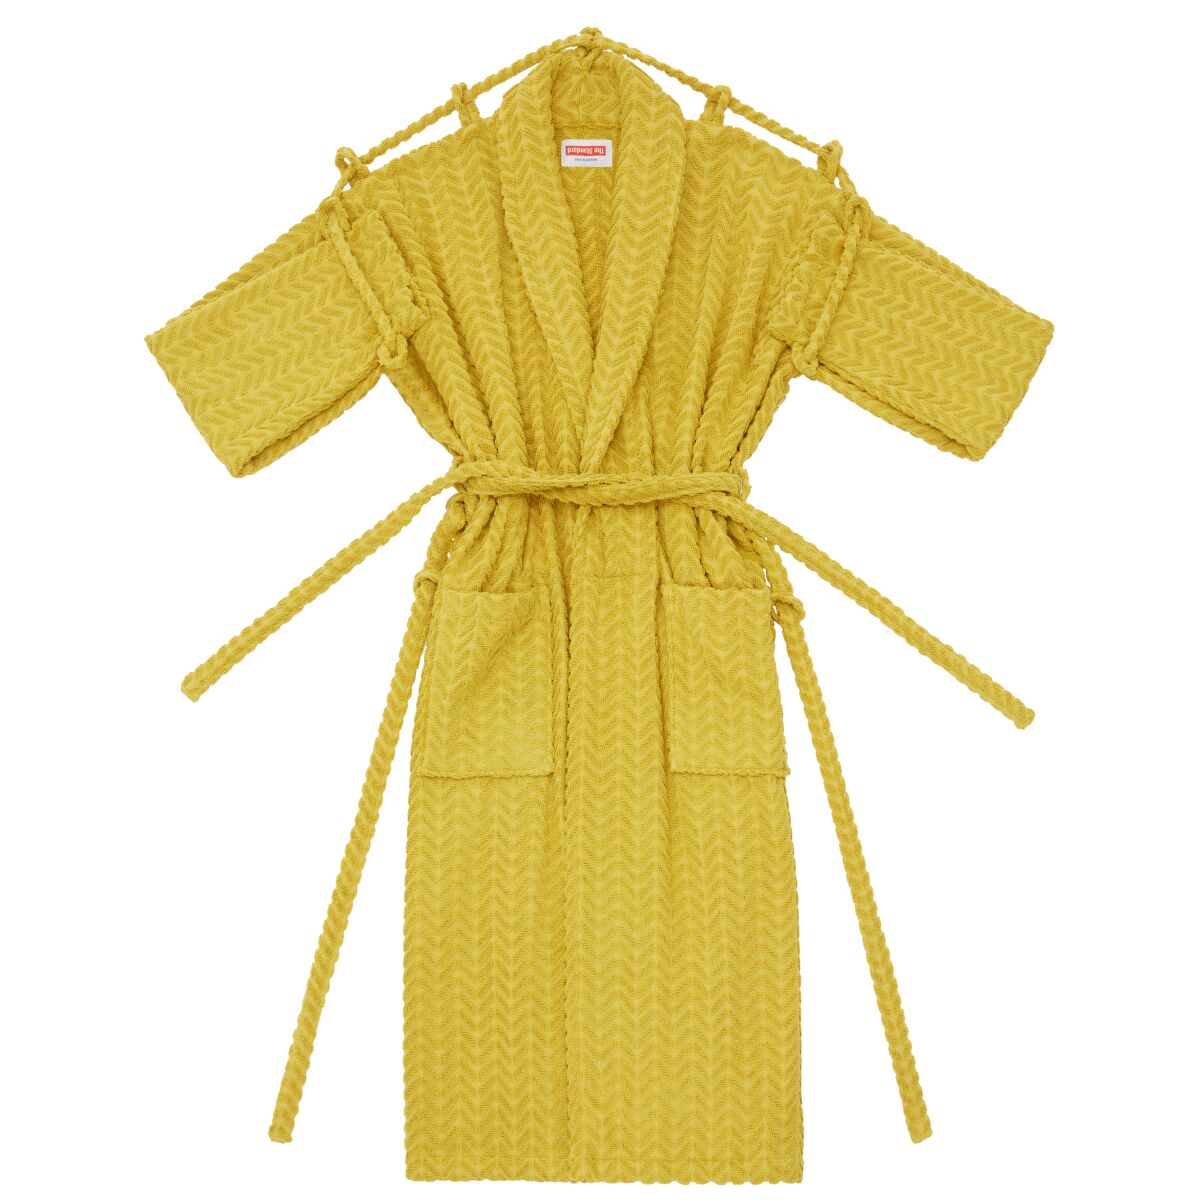 A photo of a woven terry jacquard robe with two belts from the Standard and Craig Green.